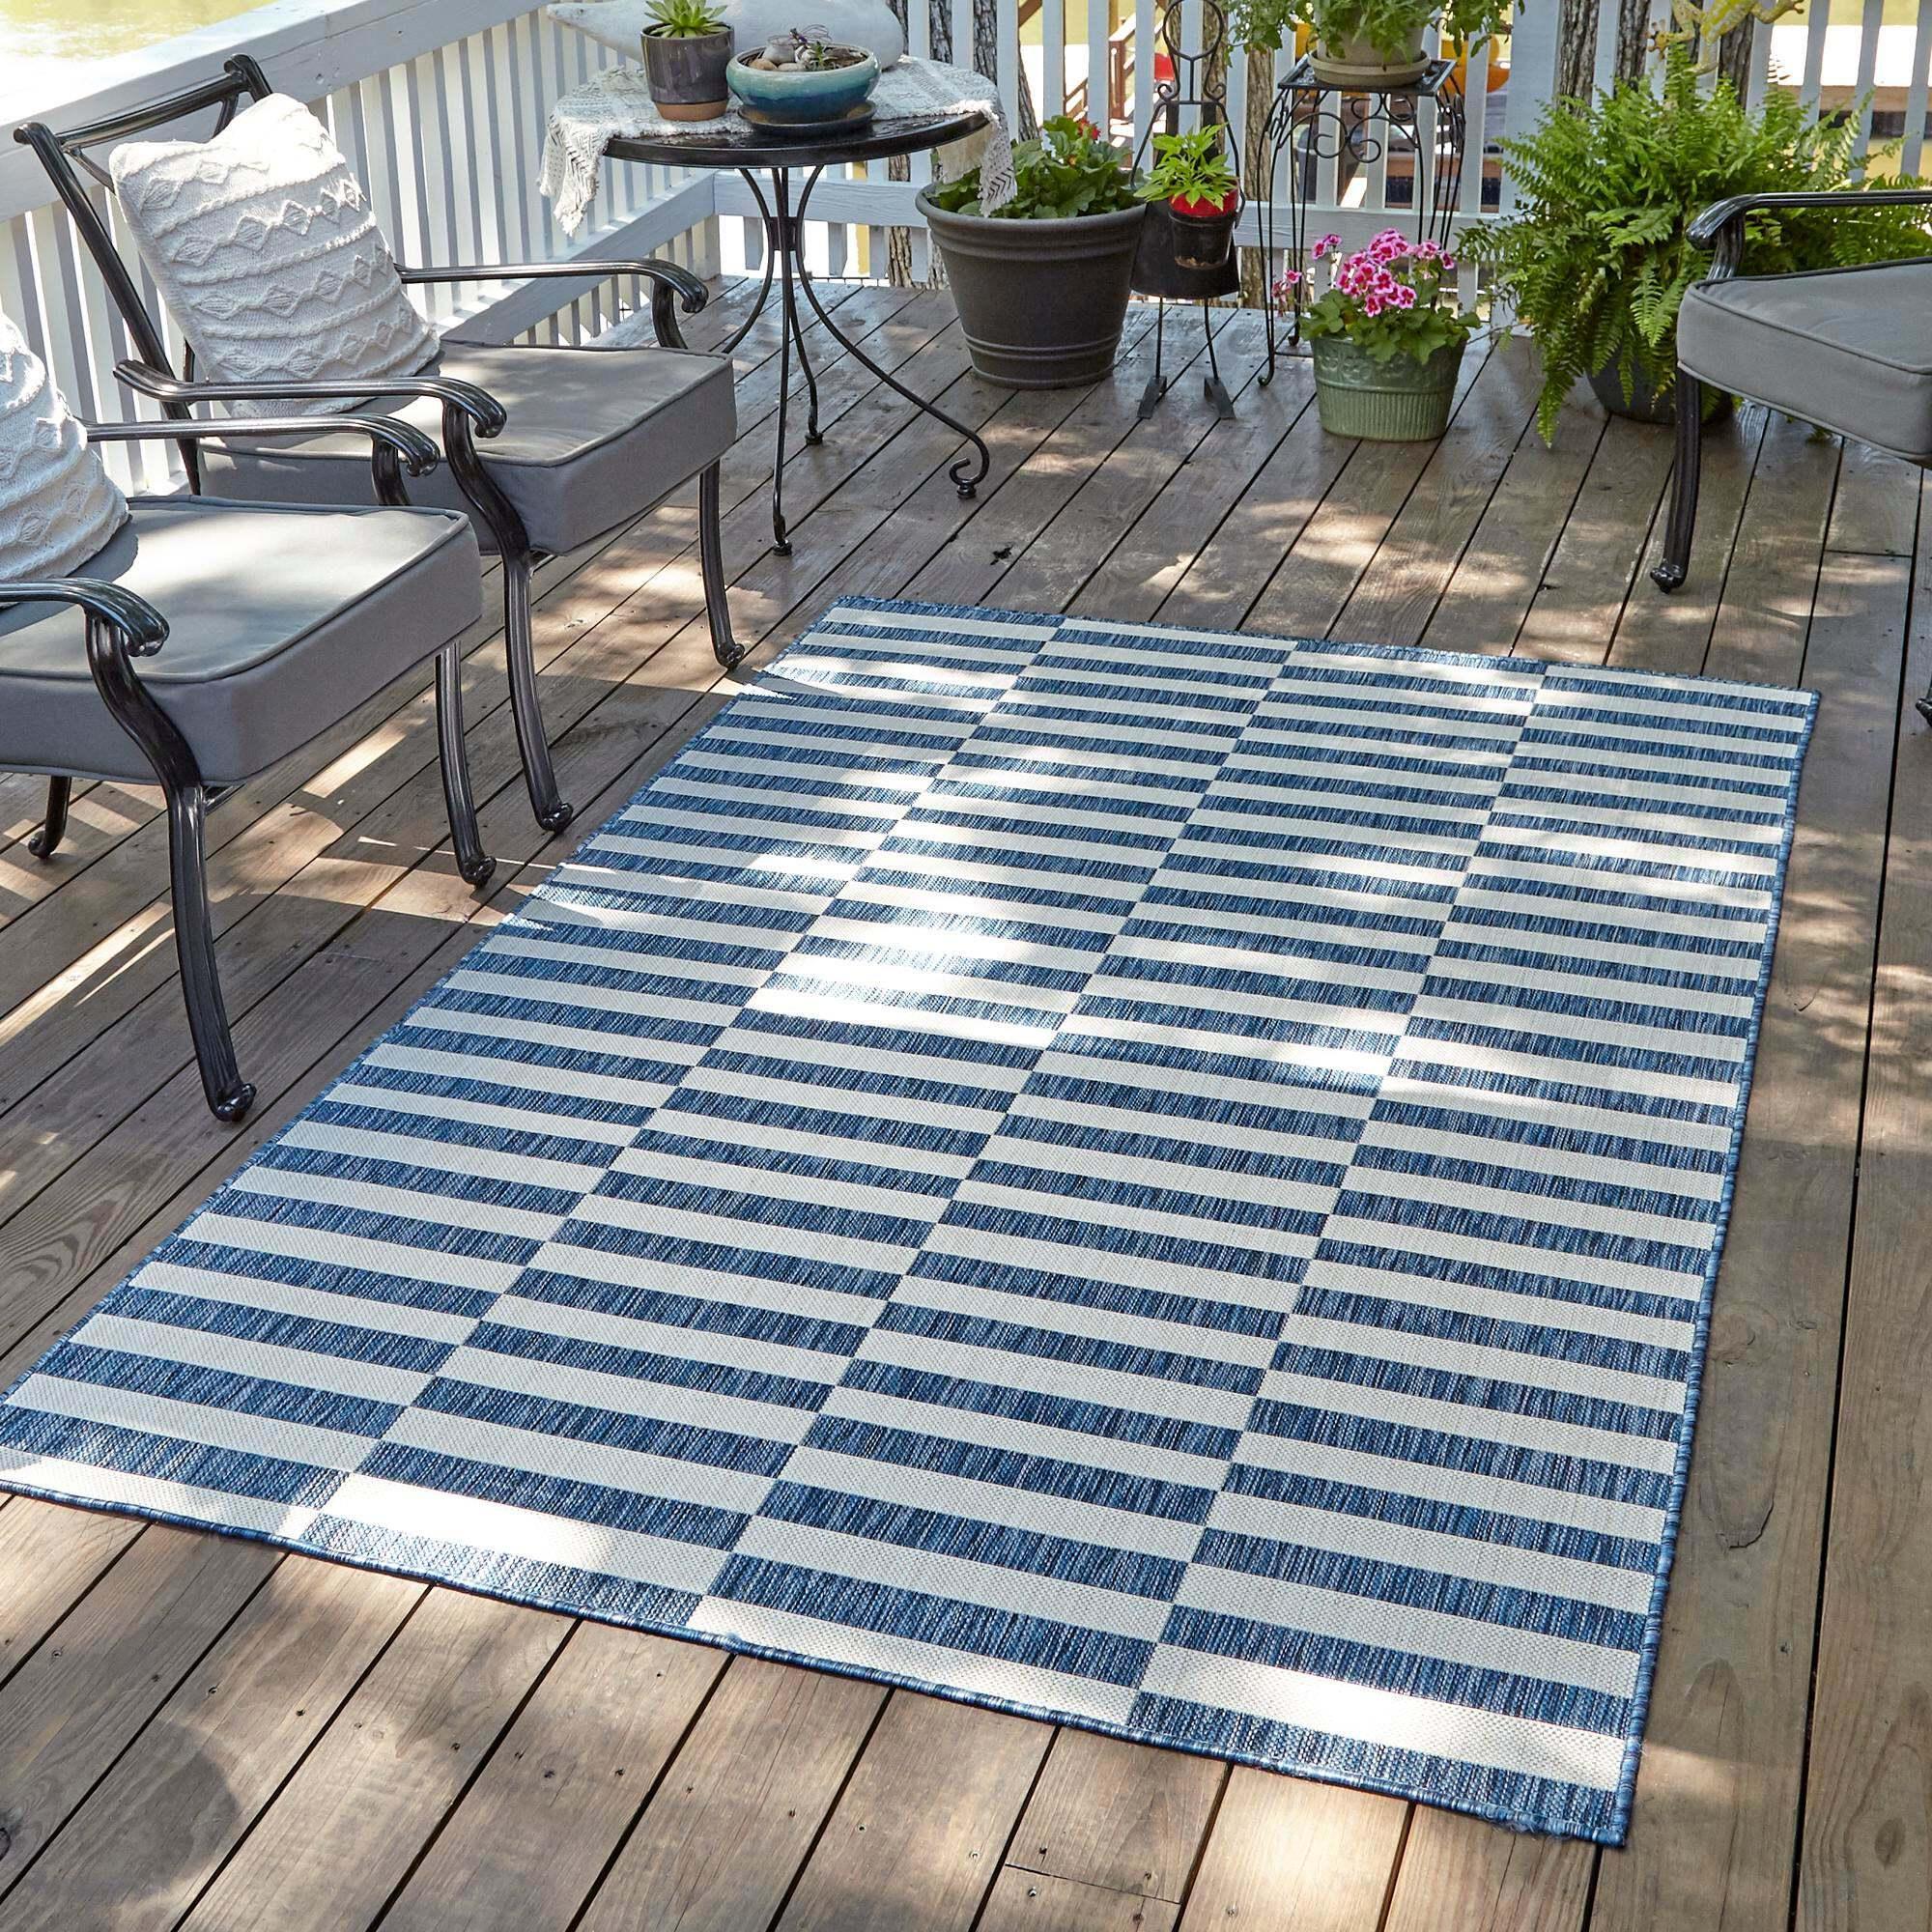 Unique Loom Outdoor Rugs - Outdoor Striped Geometric Rectangular 9x12 Rug Navy Blue & Ivory